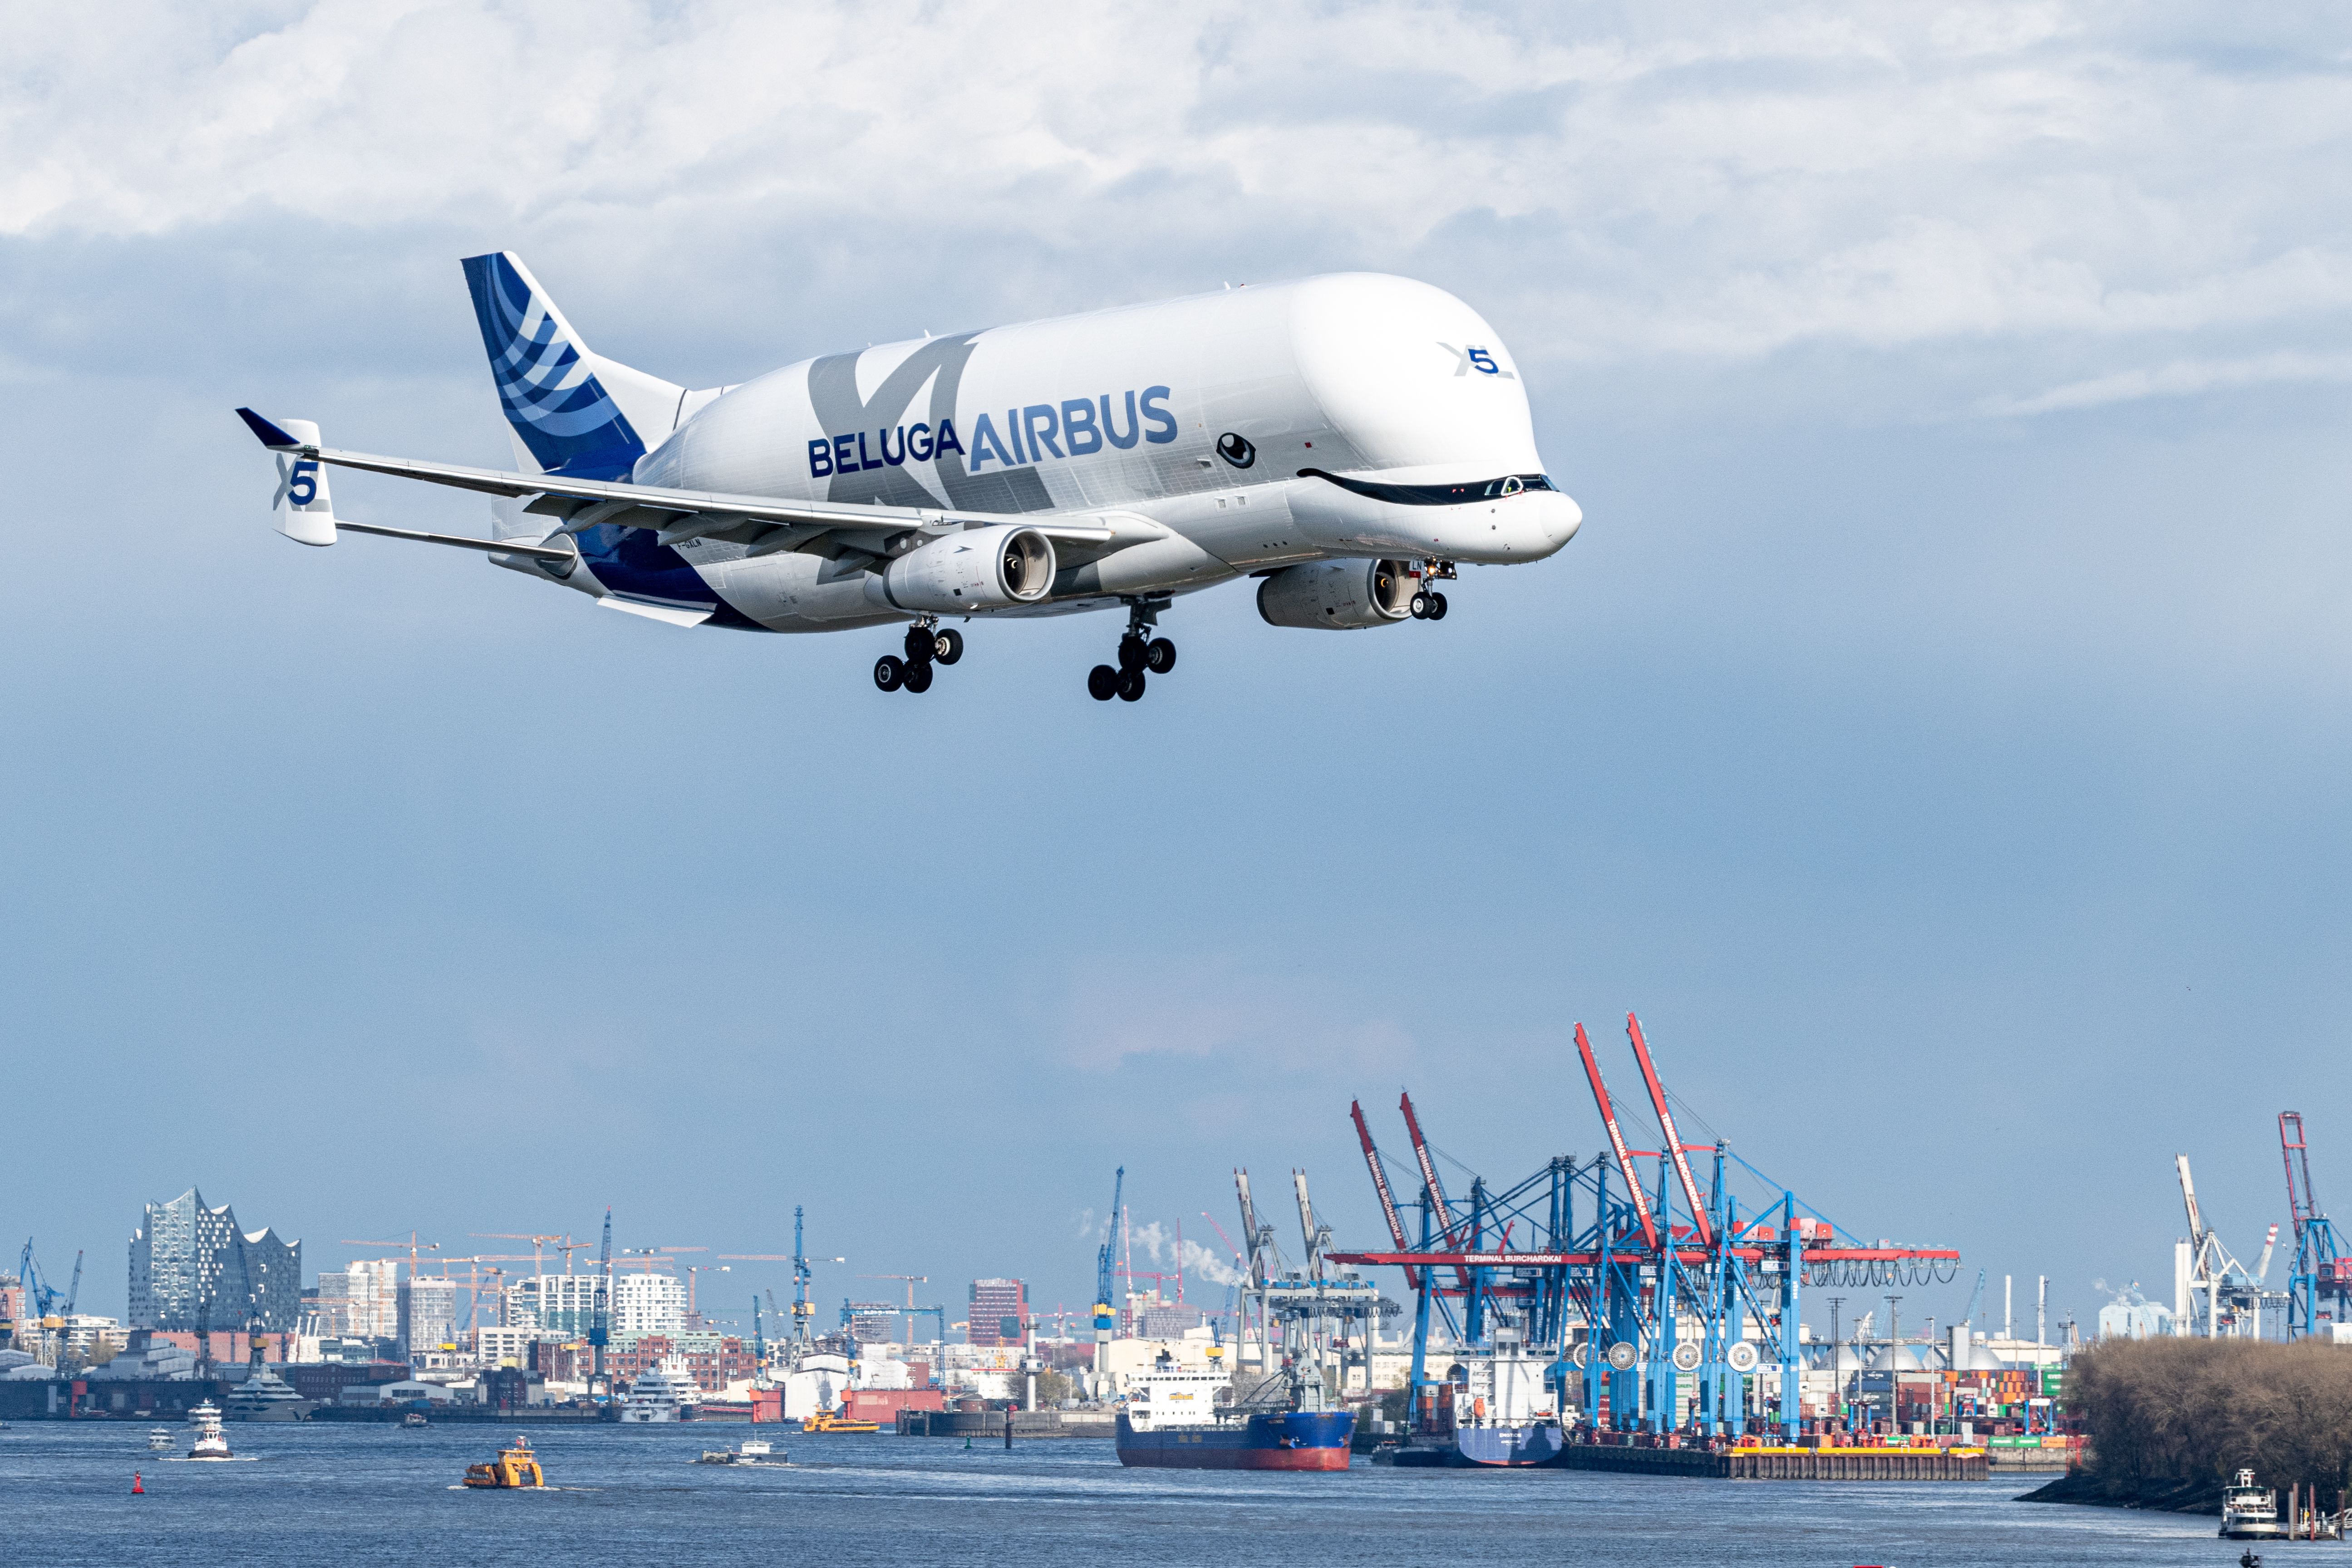 An Airbus BelugaXL about to land.